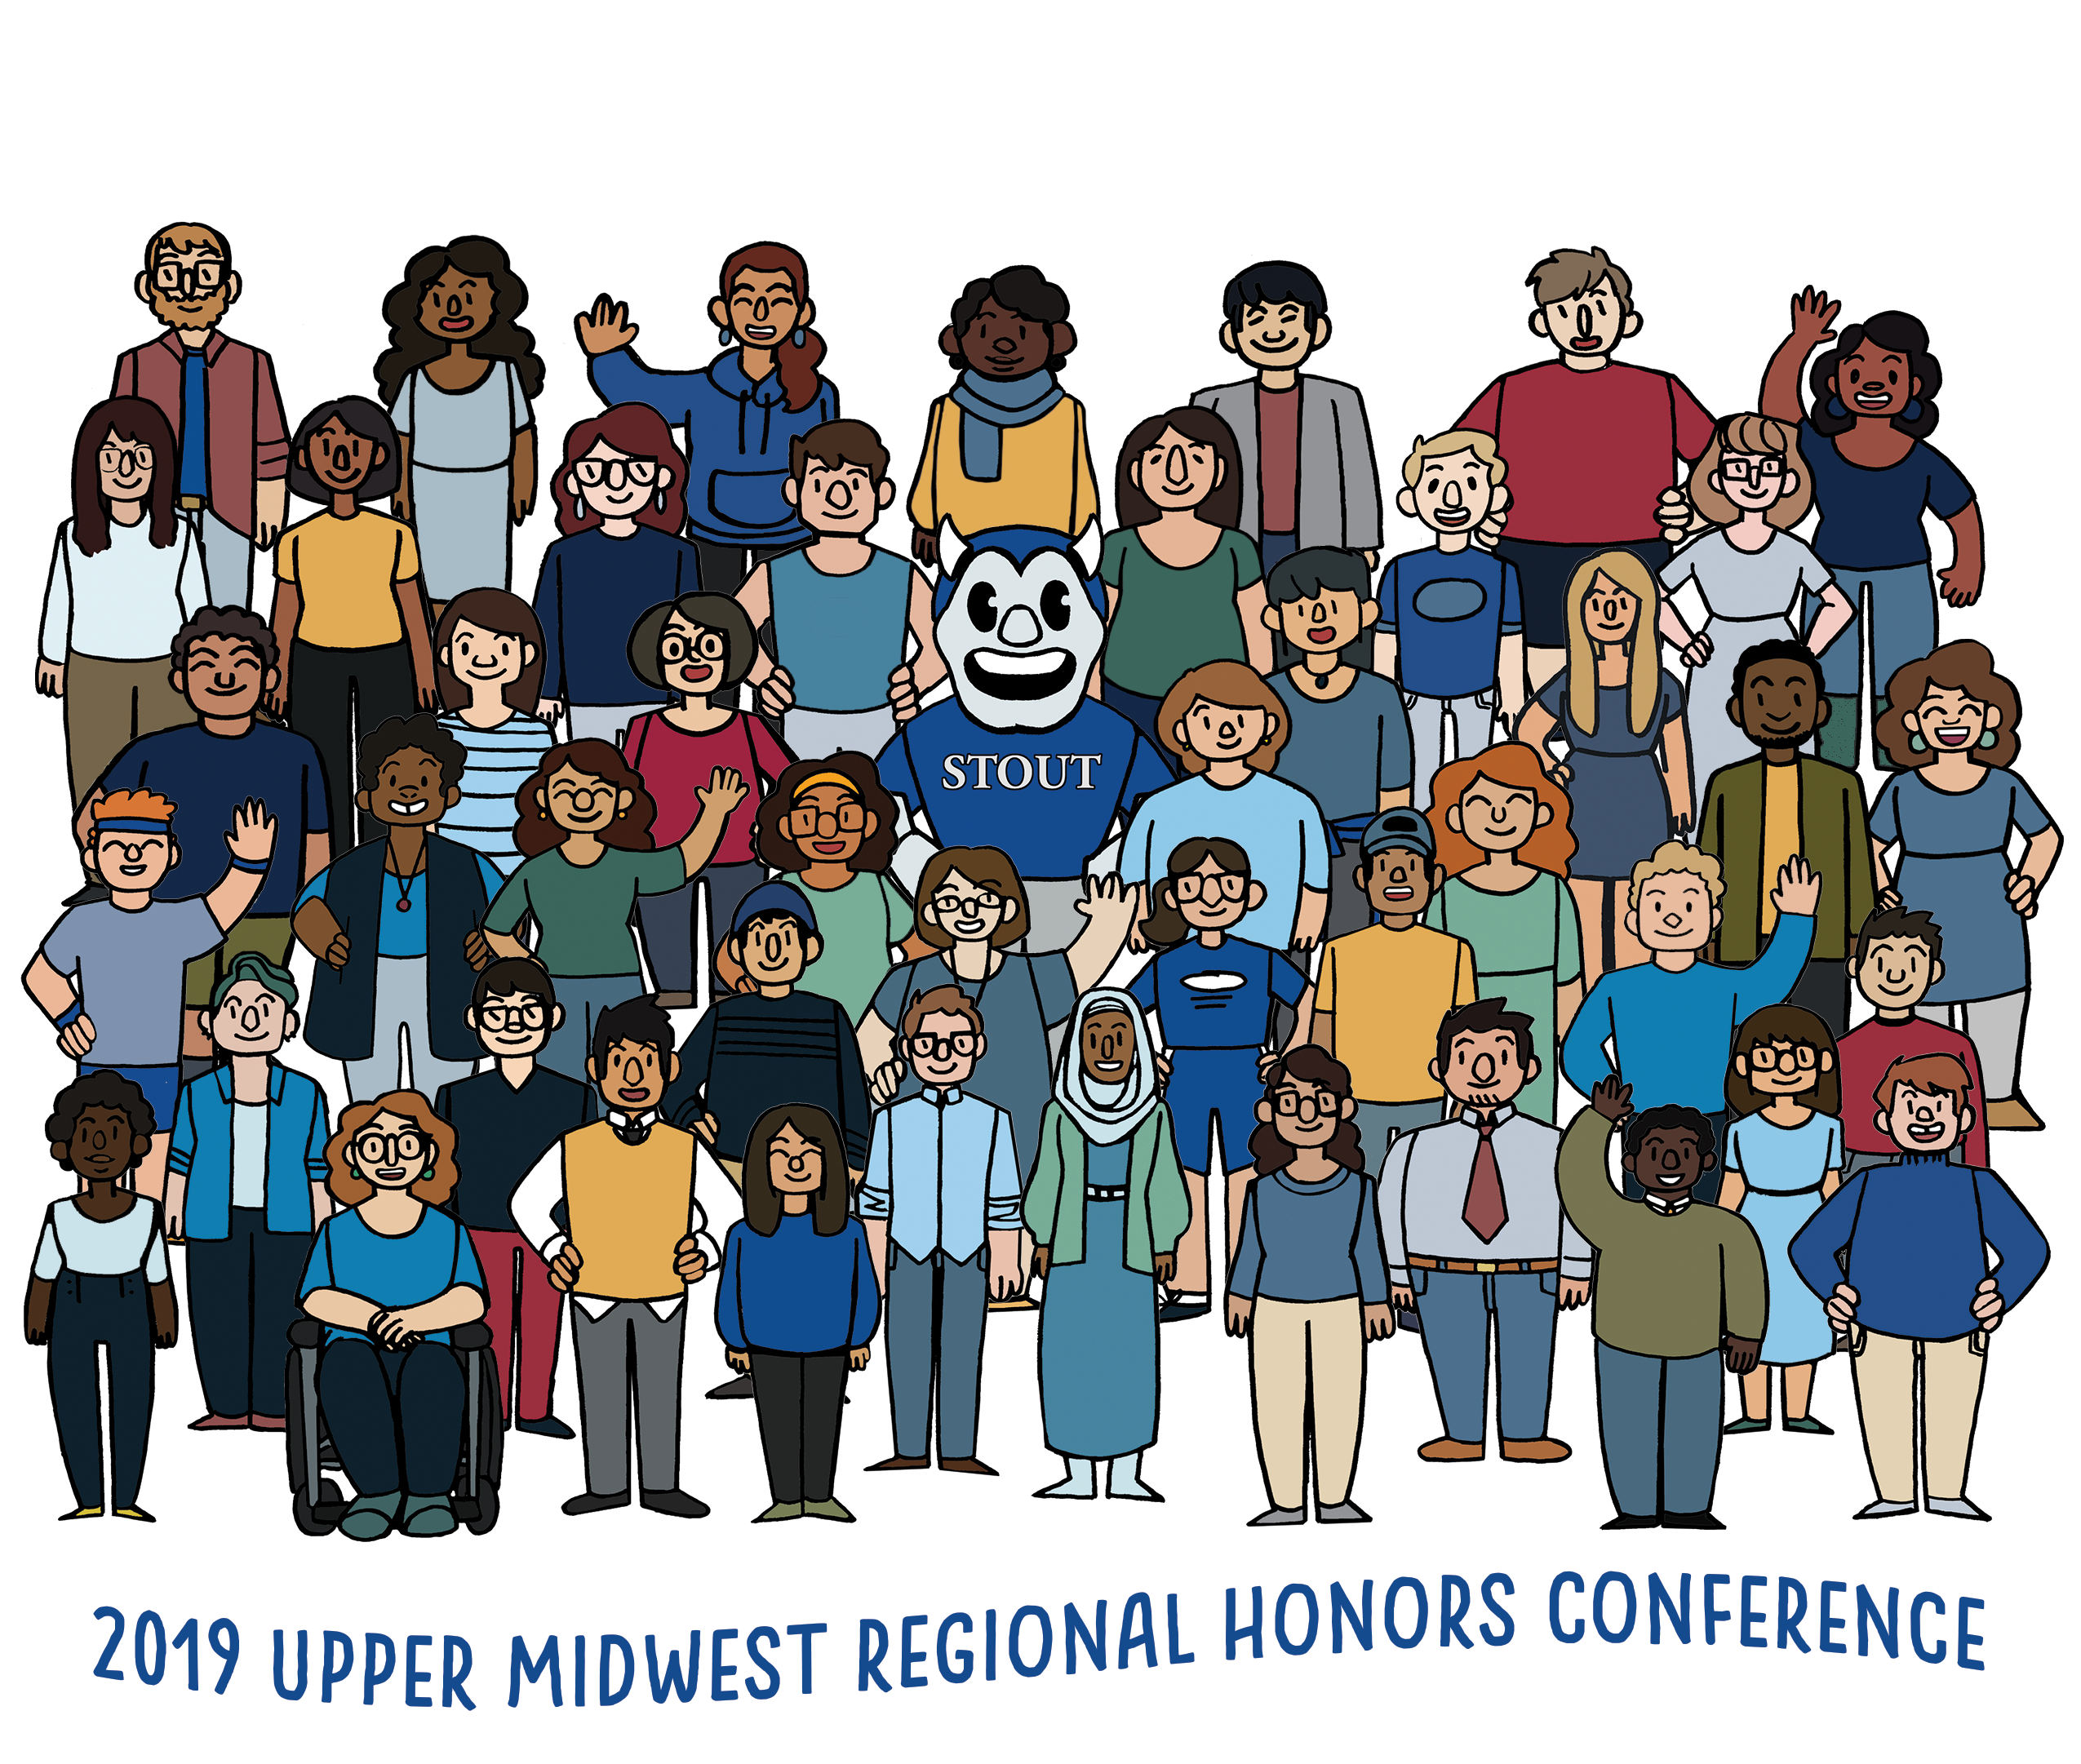 2019 Upper Midwest Honors Conference Logo - group of cartoon students and UW-Stout mascot Blaze